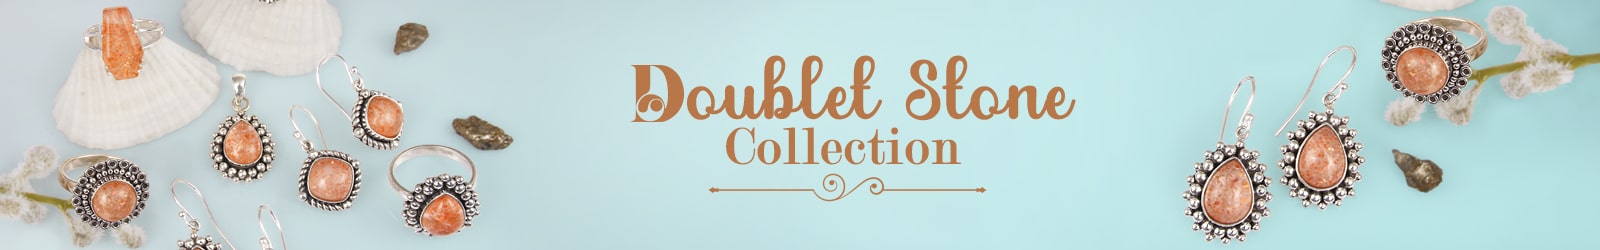 Doublet Stone Jewelry Collection